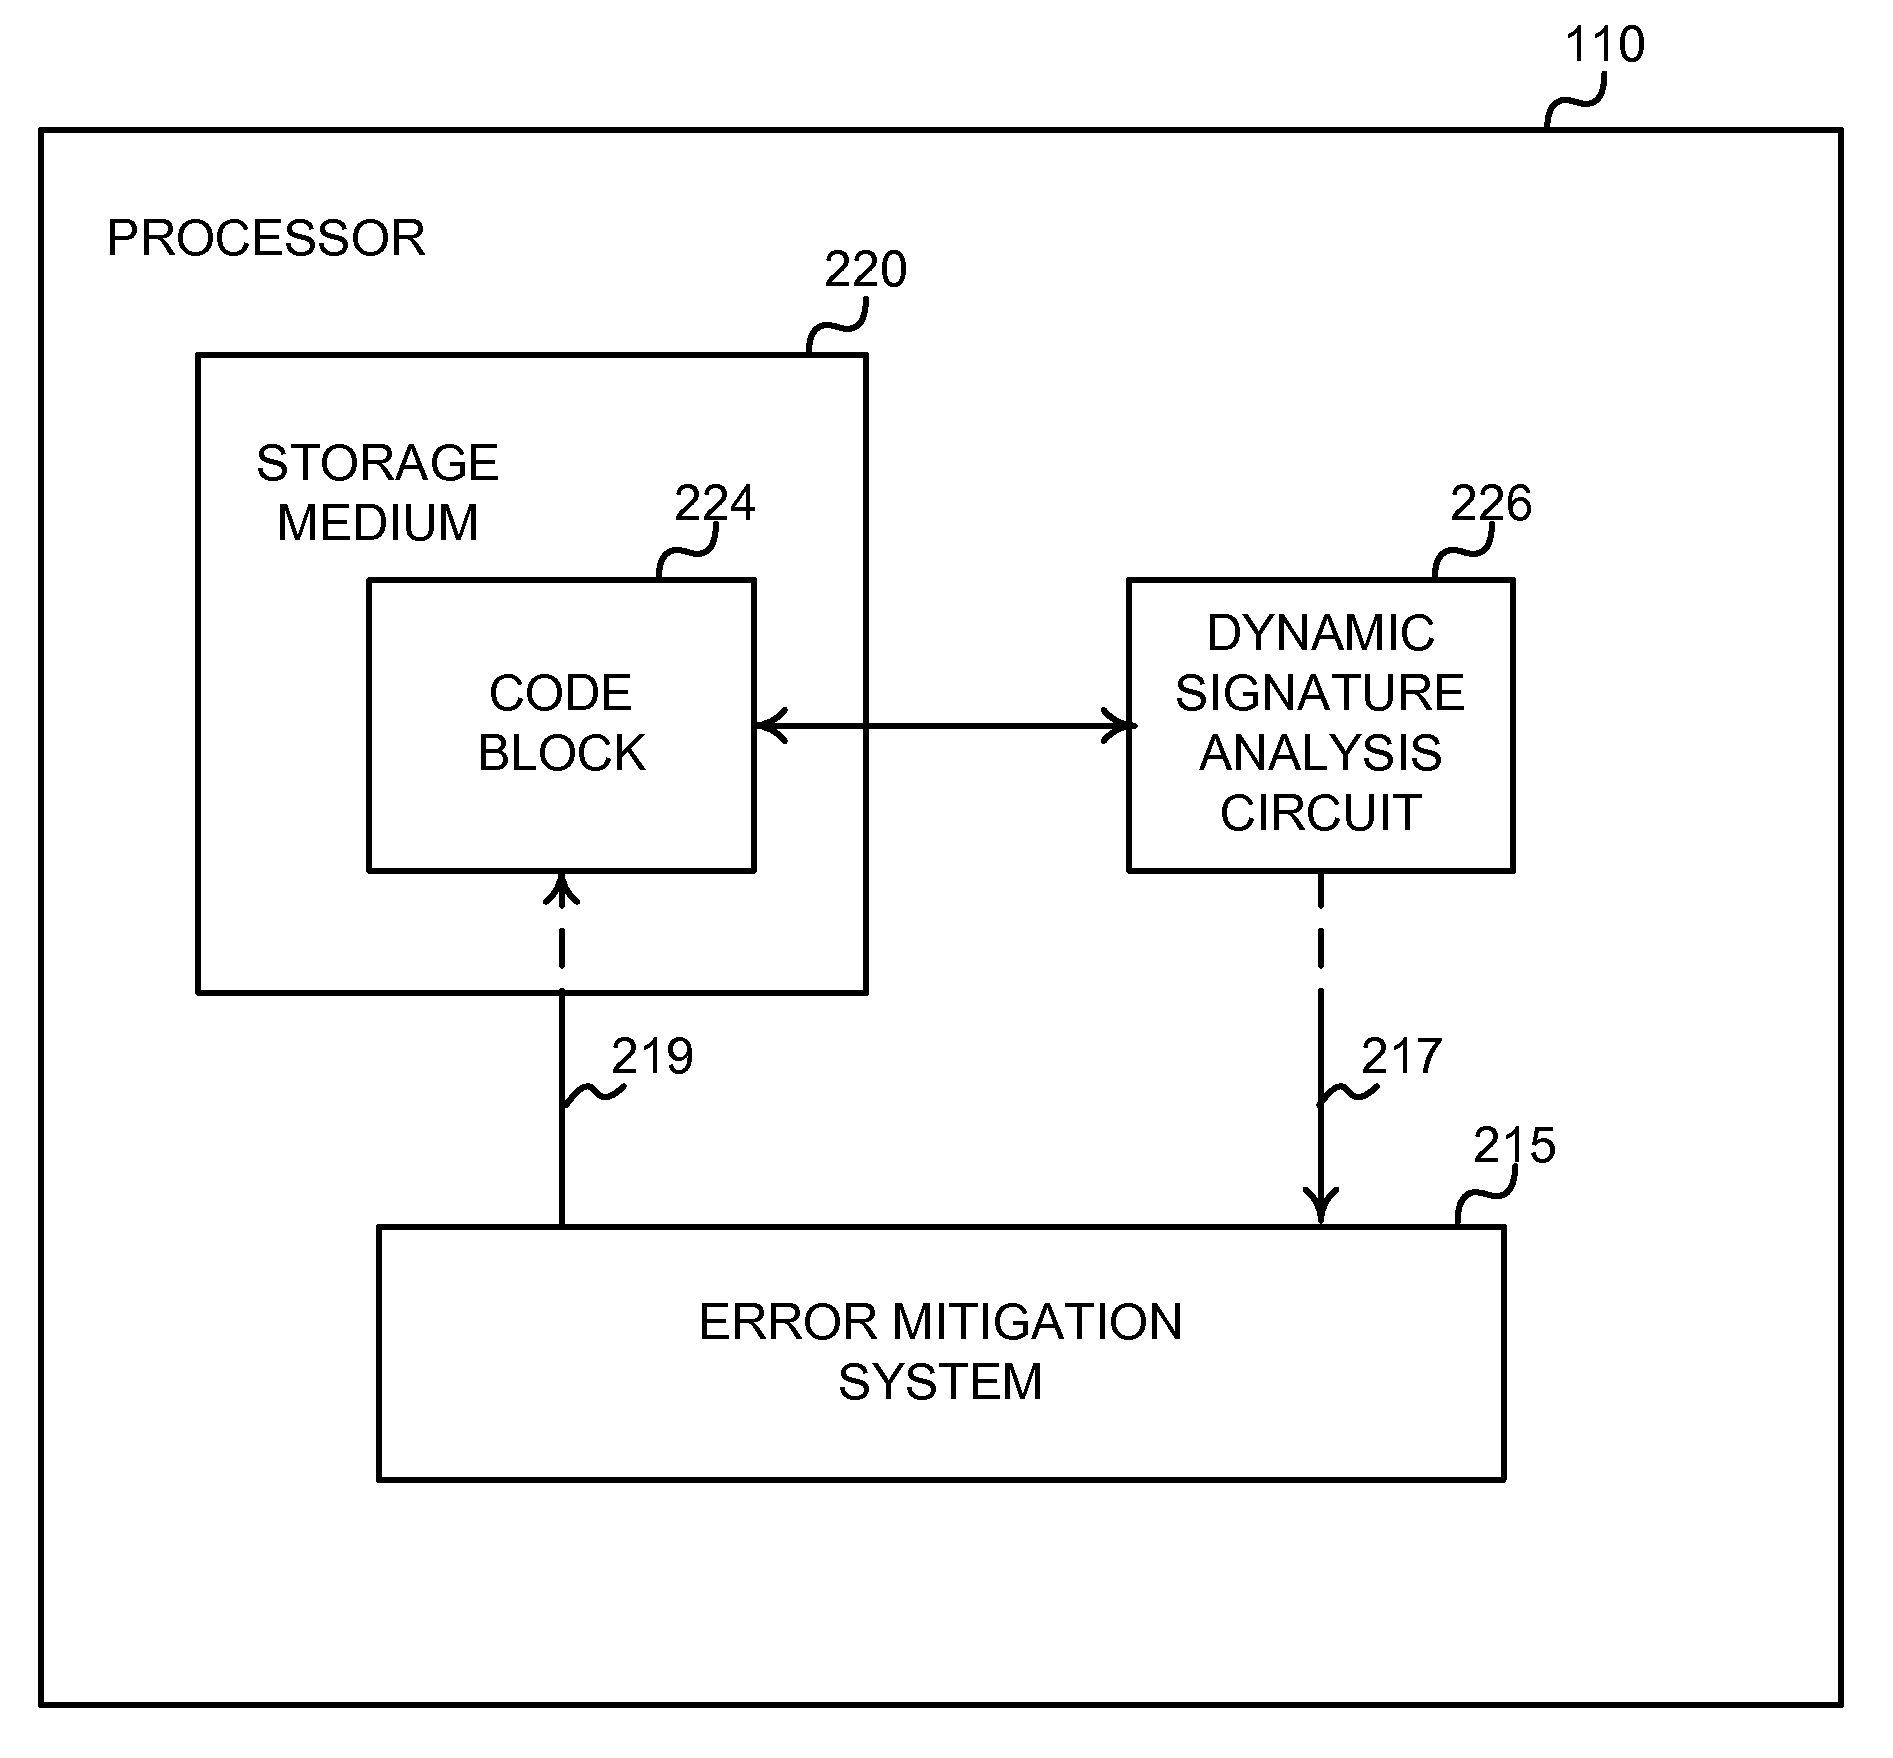 Architecture for a self-healing computer system